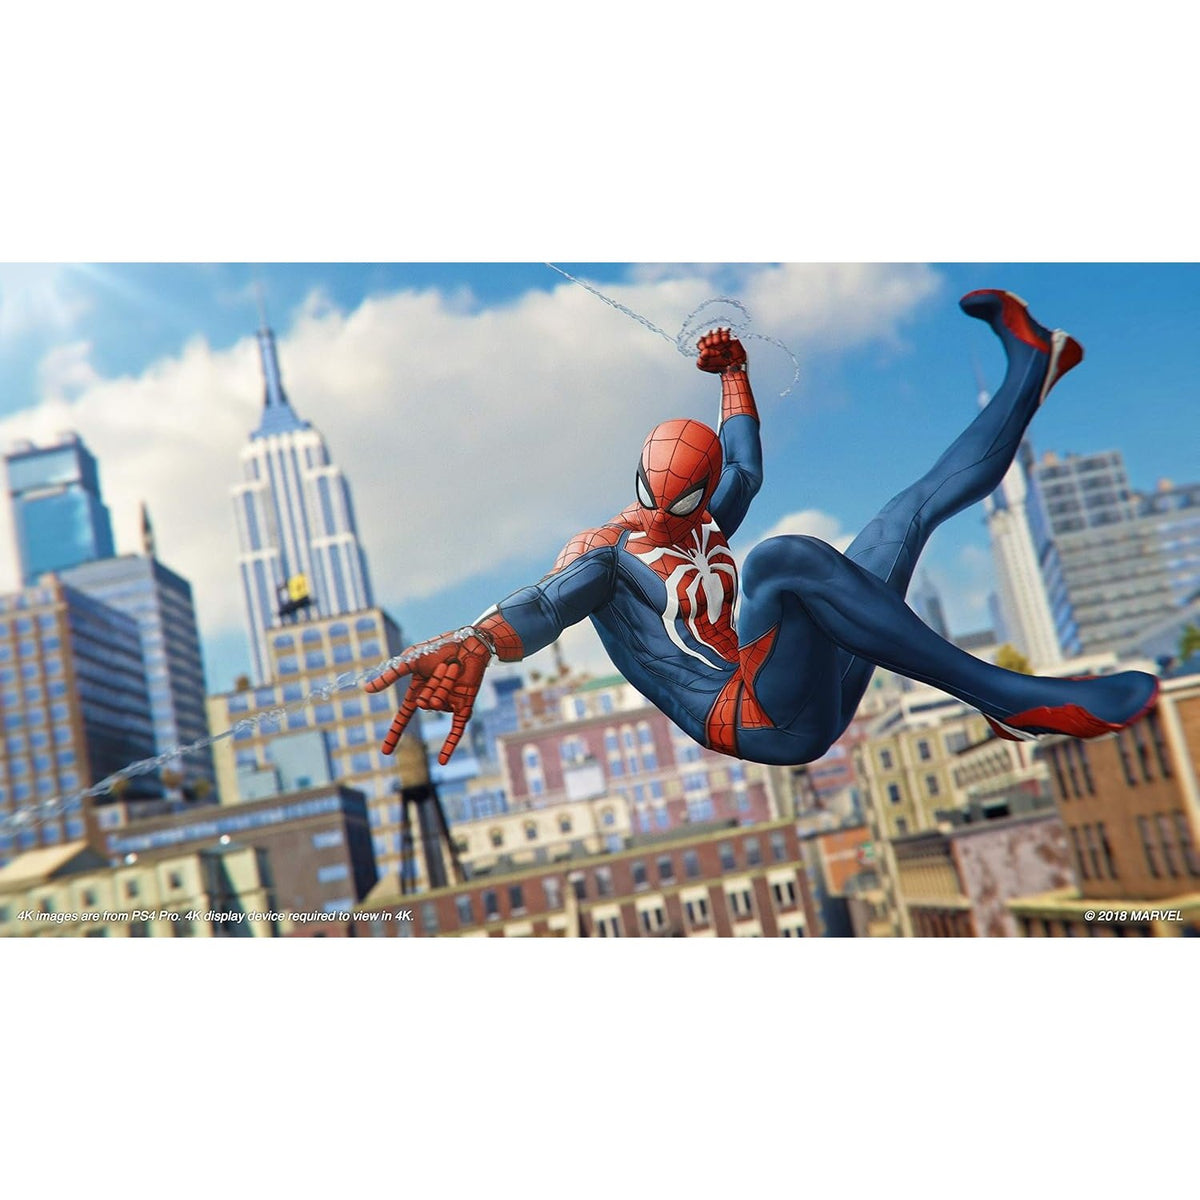 Spider-Man Game Of The Year Edition Sony PlayStation 4